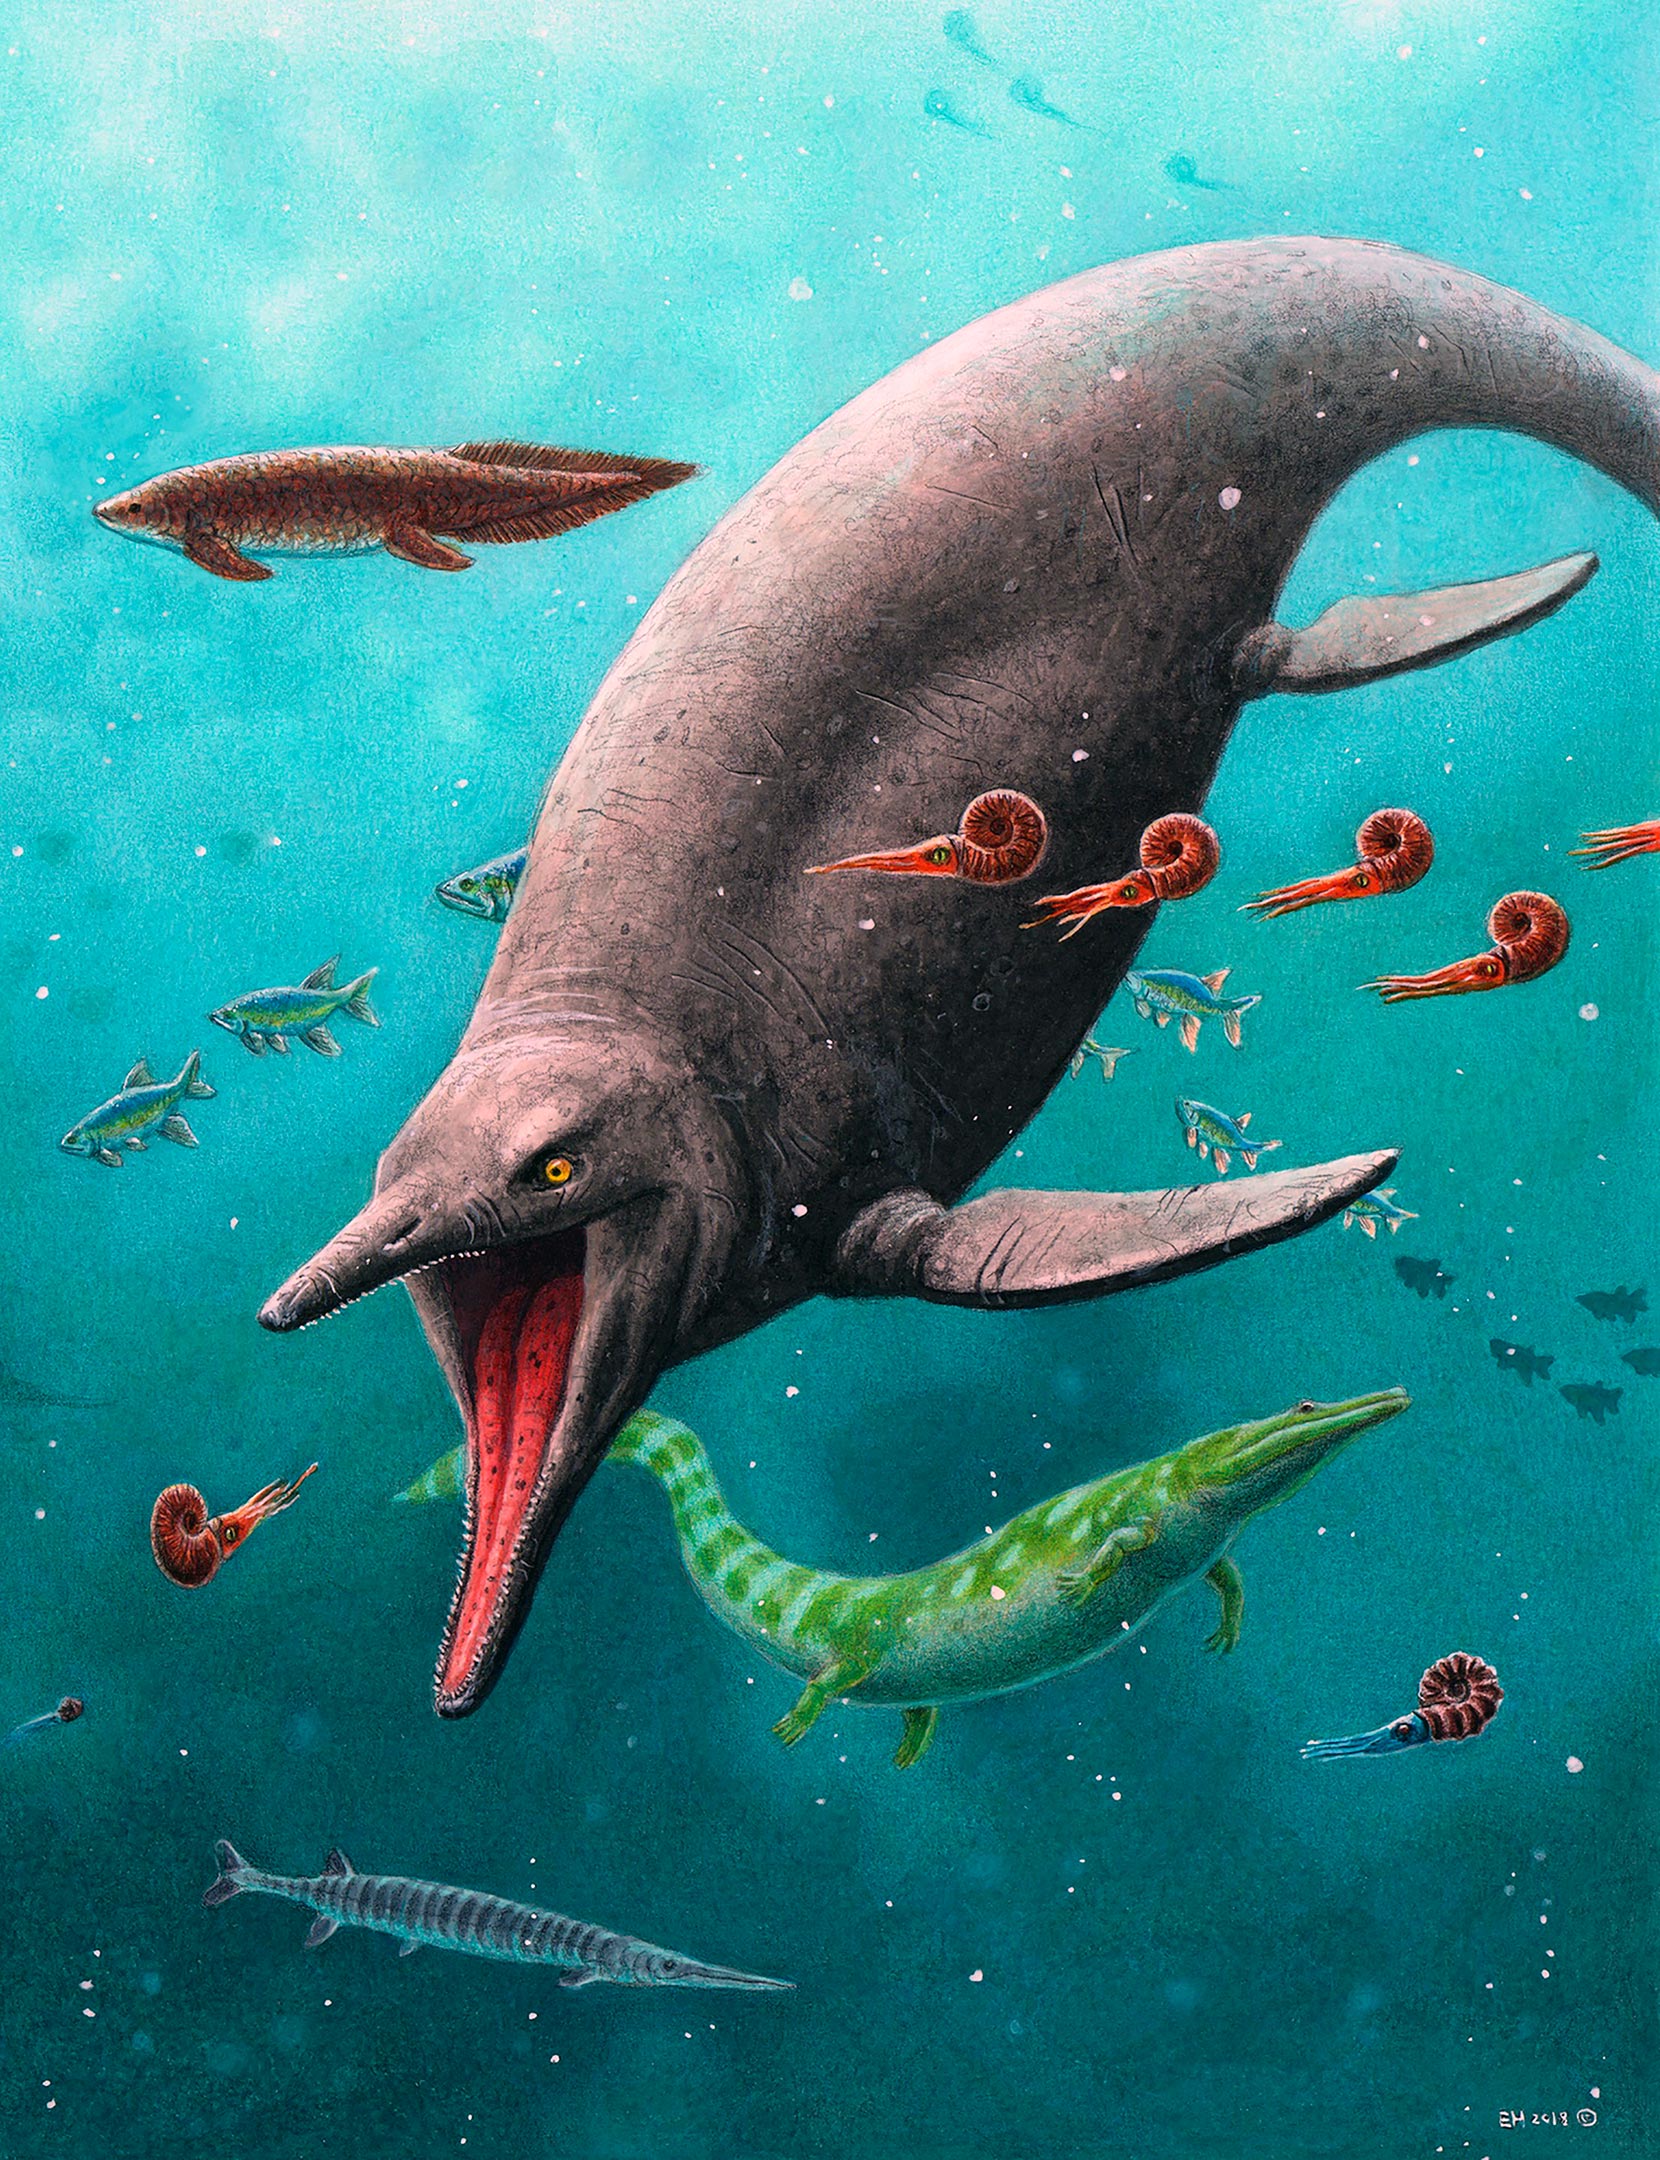 Oldest Sea Reptiles from the Age of Dinosaurs Discovered